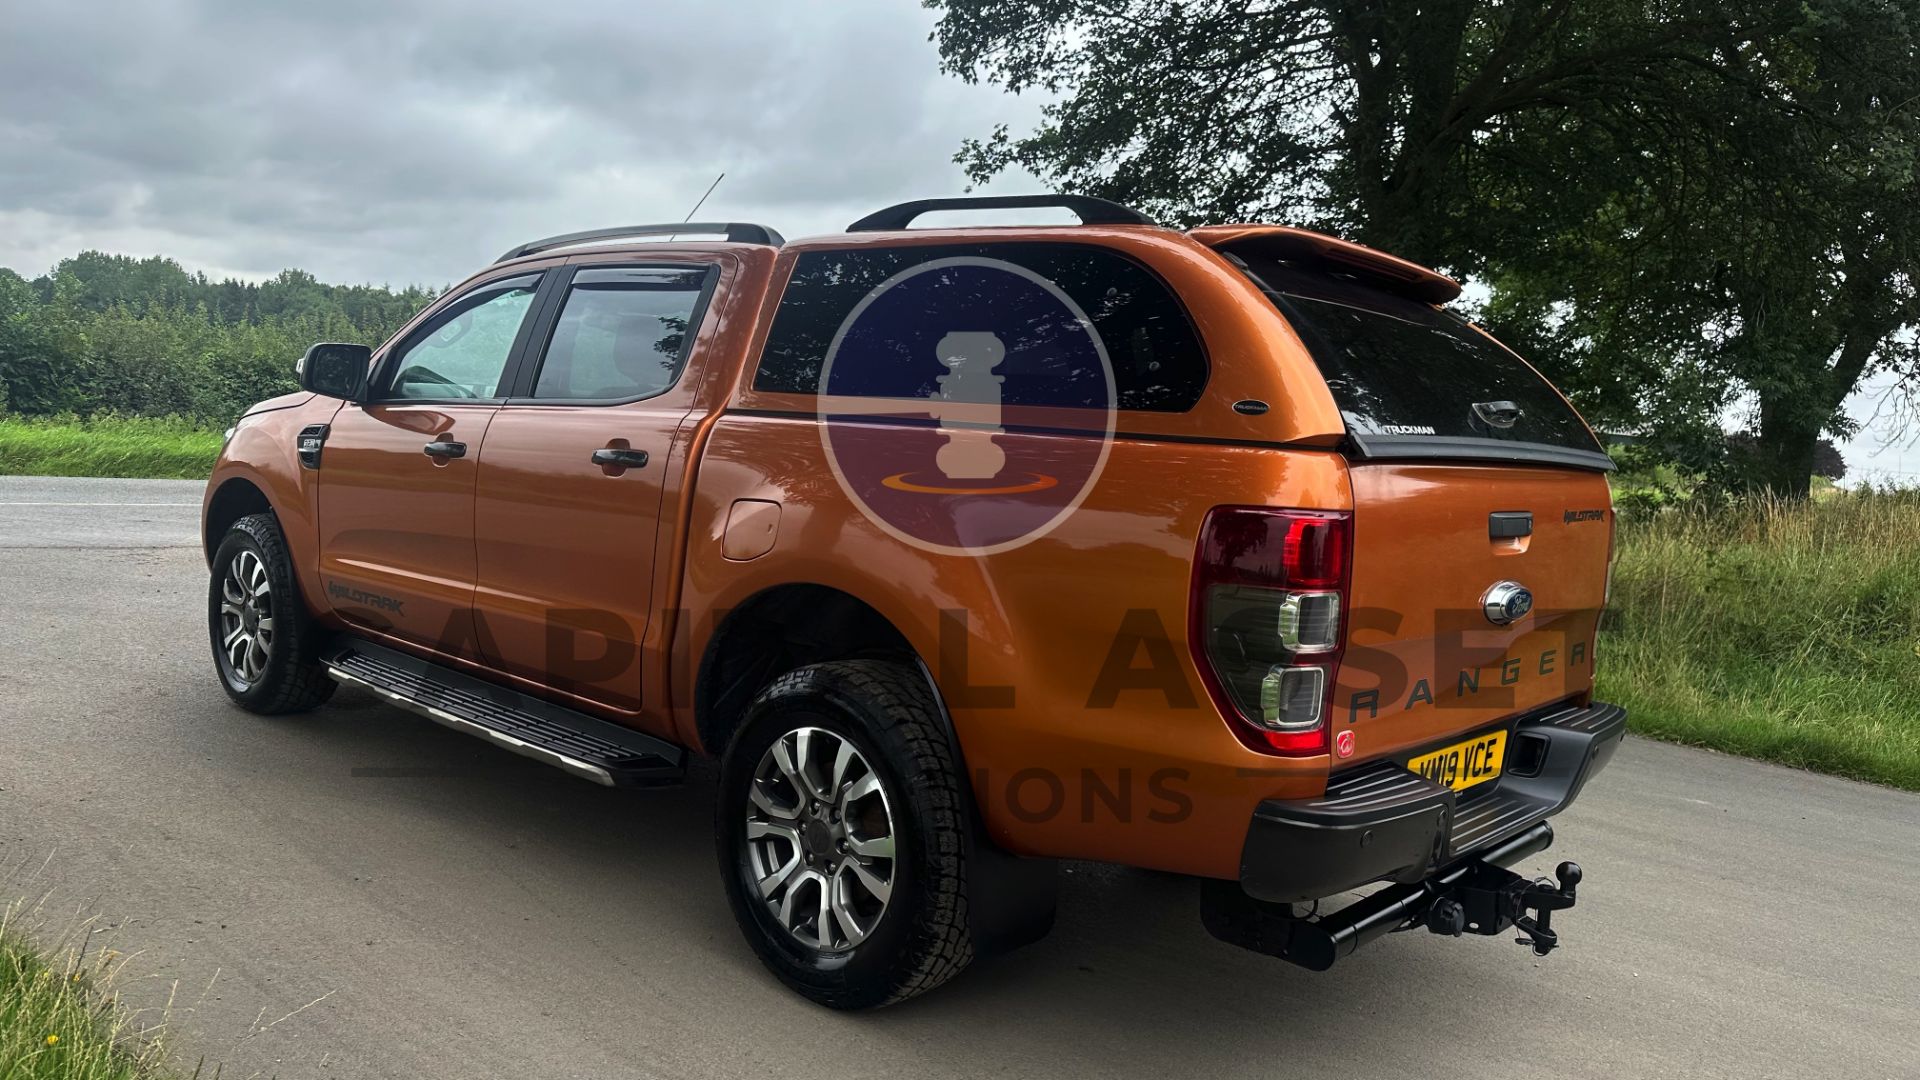 (ON SALE) FORD RANGER *WILDTRAK EDITION* DOUBLE CAB PICK-UP (2019 - EURO 6) 3.2 TDCI - AUTOMATIC - Image 10 of 53